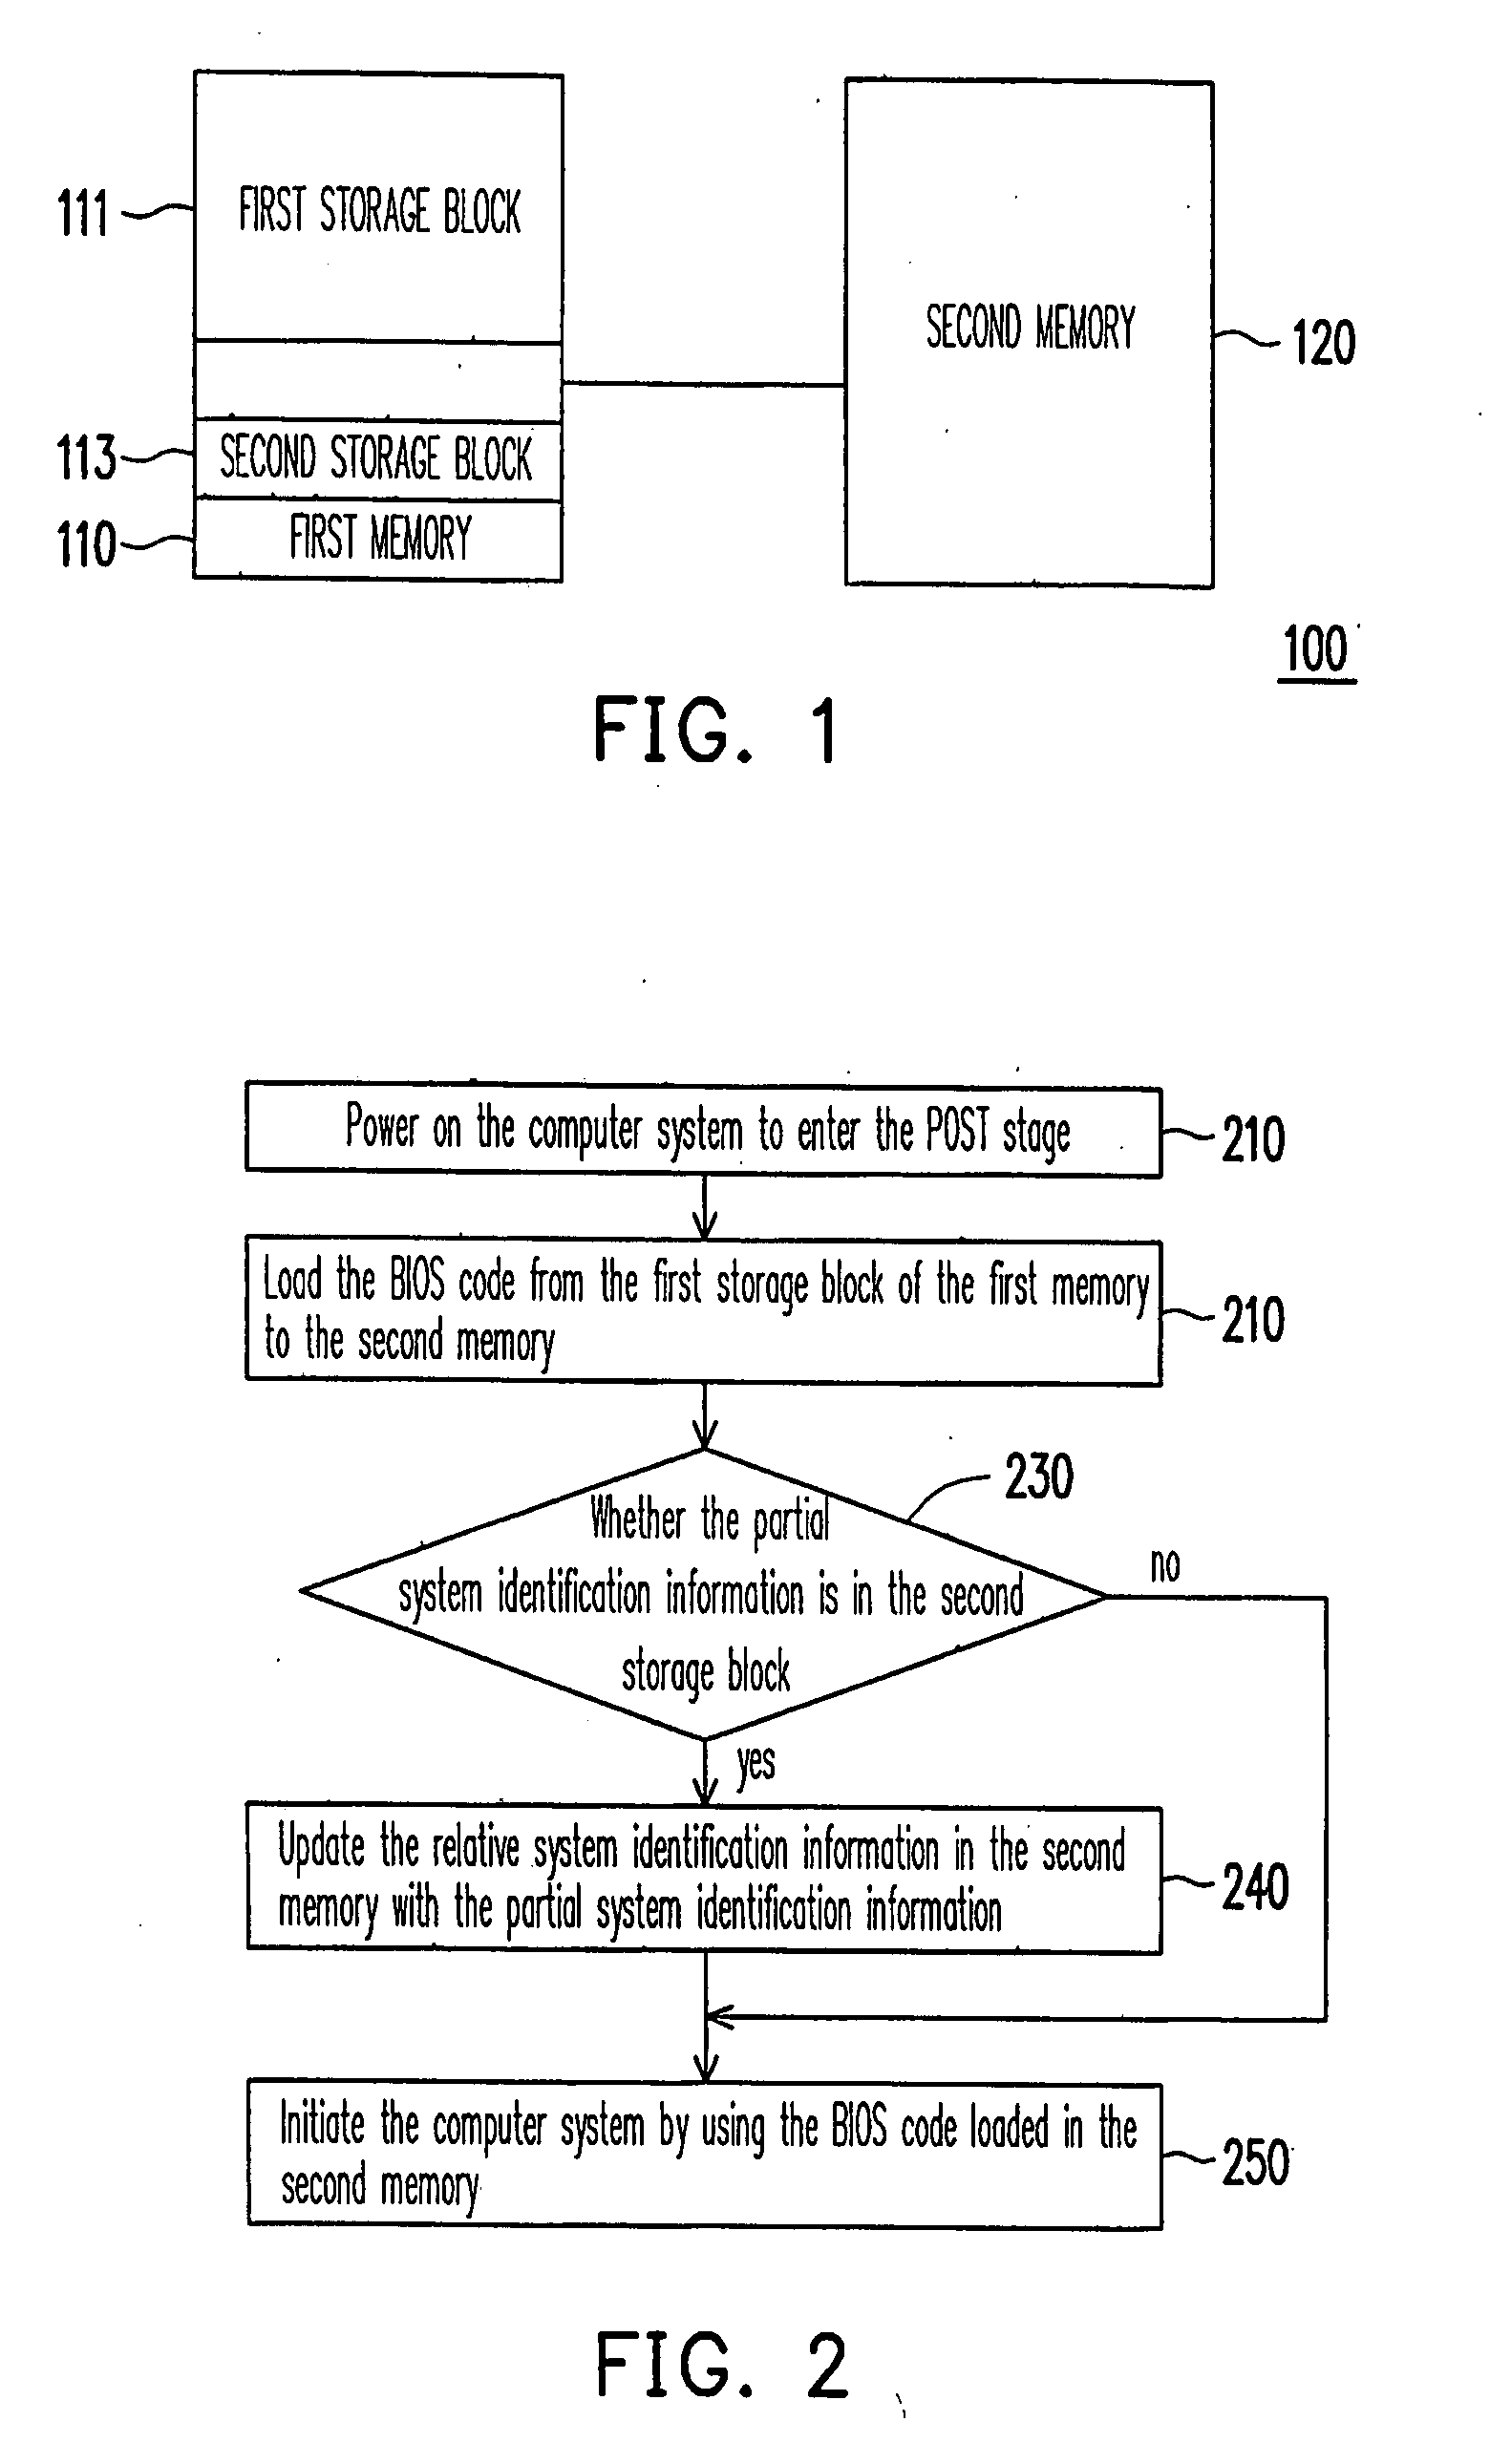 Method for executing power on self test on a computer system and updating SMBIOS information partially